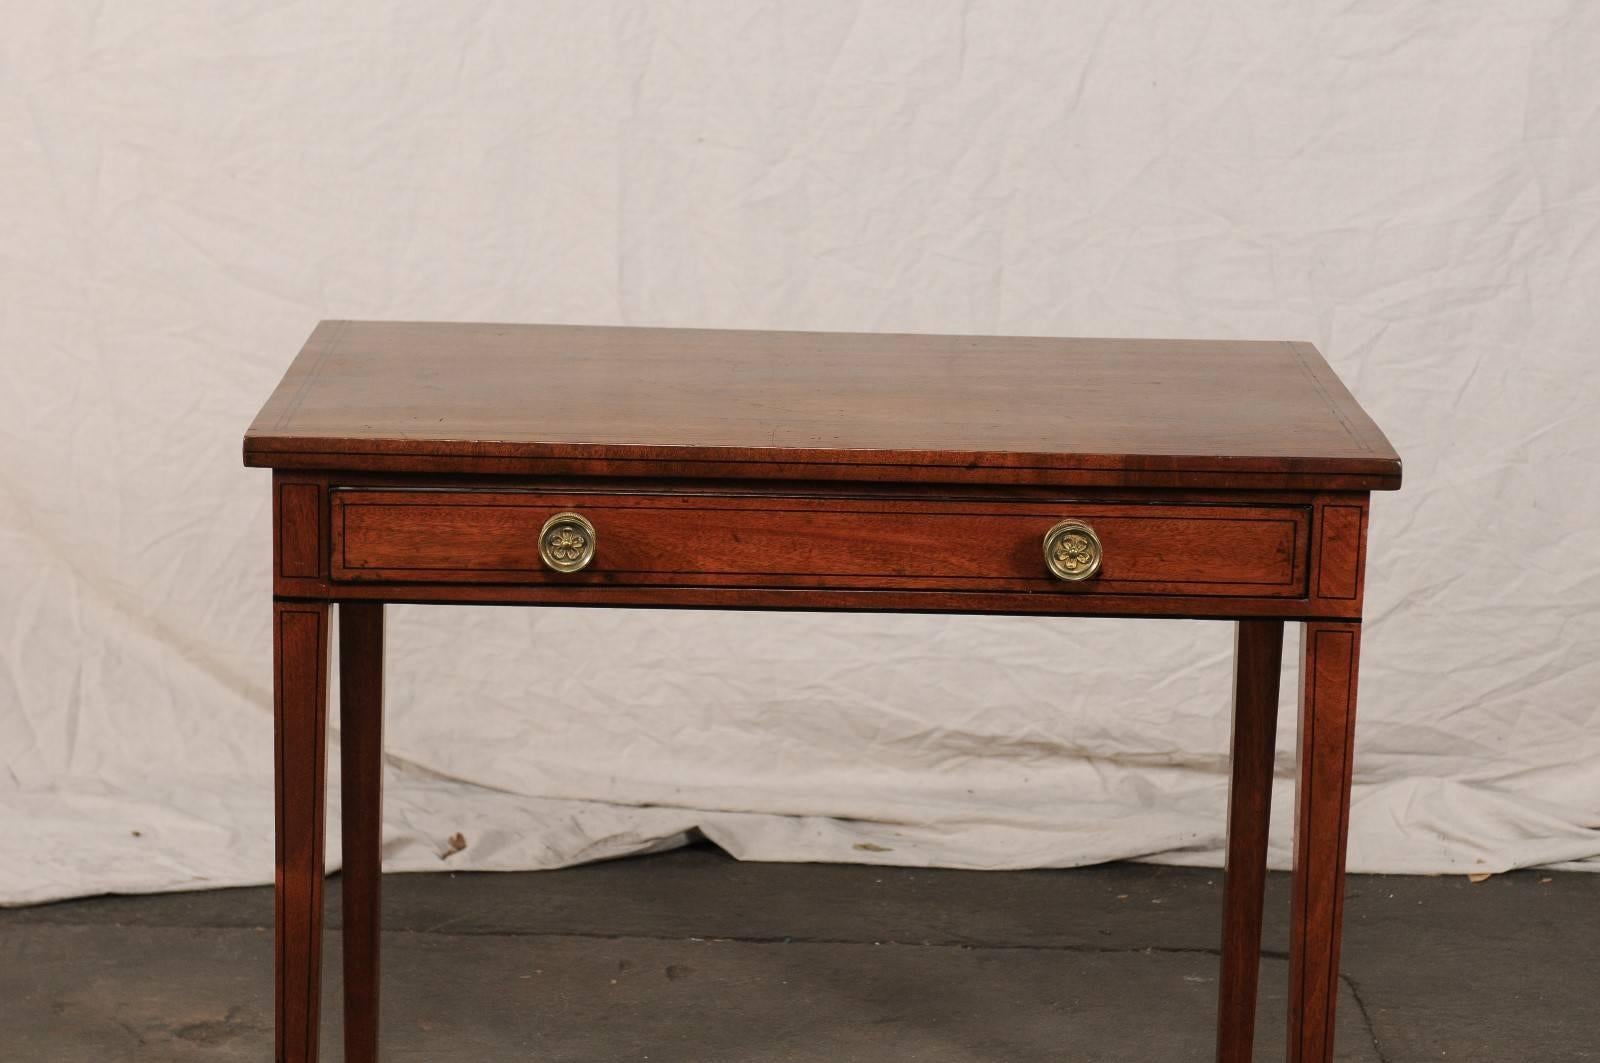 Early 19th Century English Regency Style Mahogany Table with Inlay, One Drawer 1